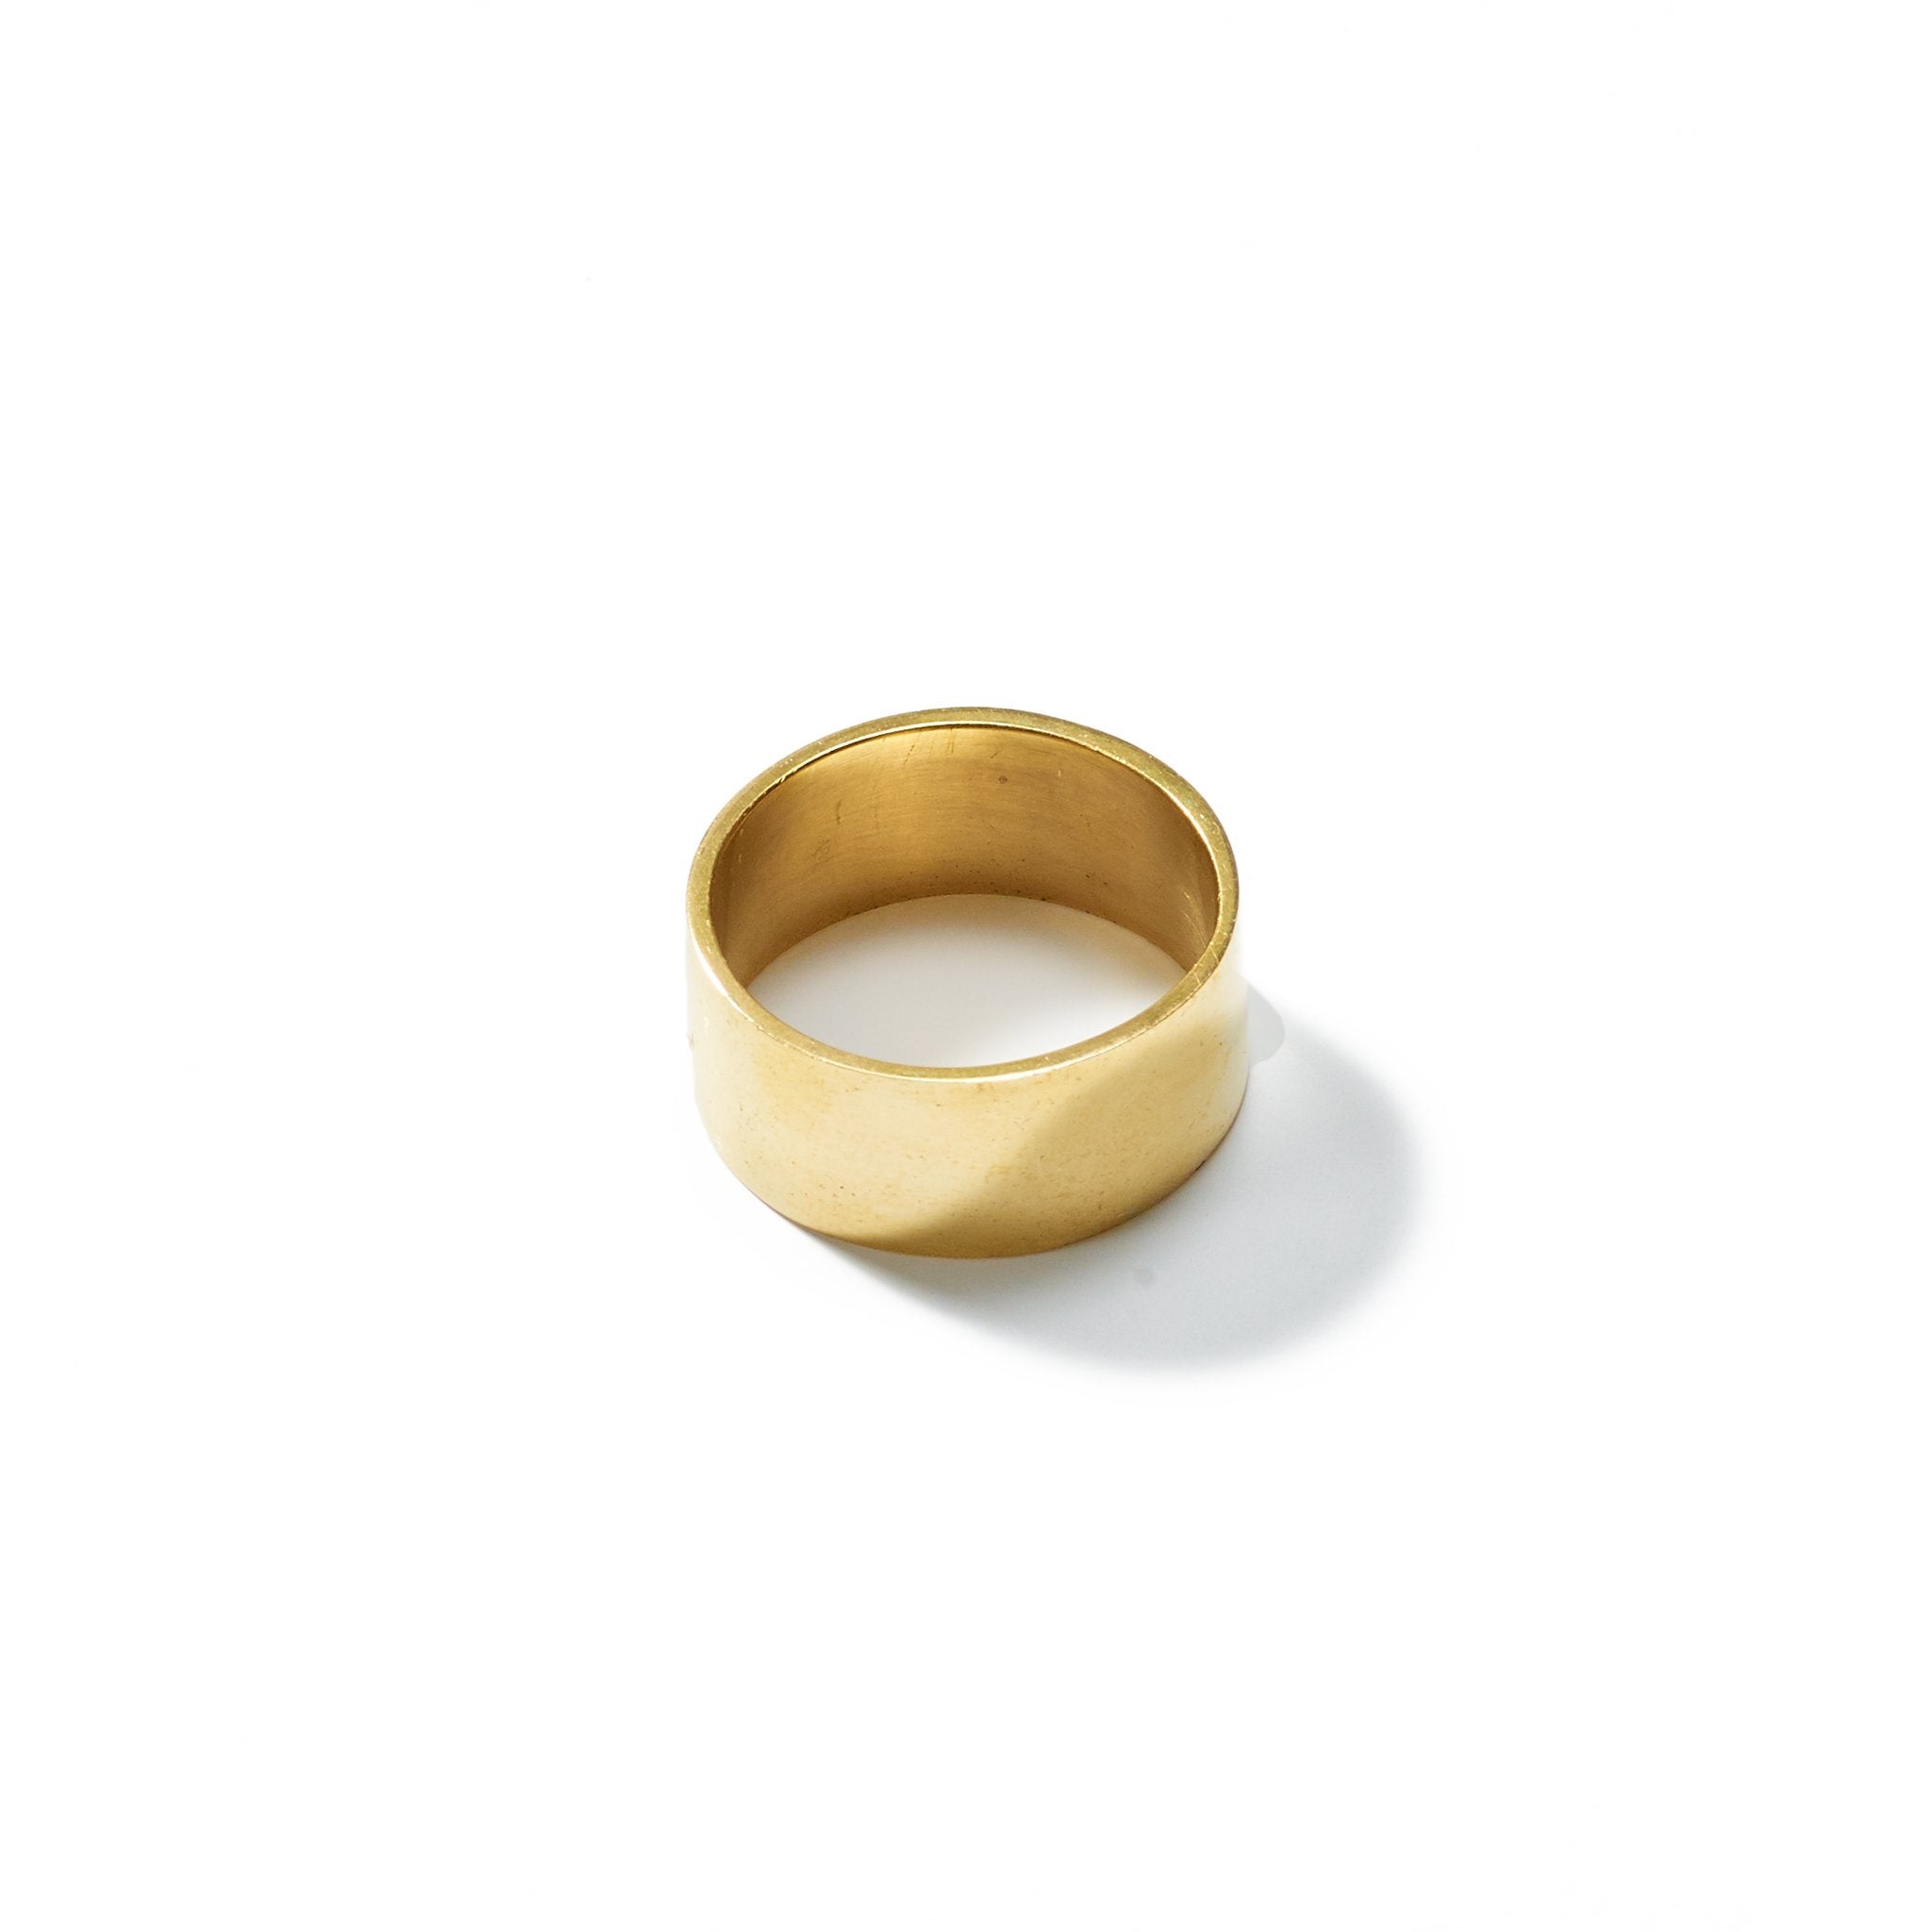 A classic and understated size 8 ring, of wide width, handcrafted from upcycled brass.Perfect for stacking or beautiful alone.